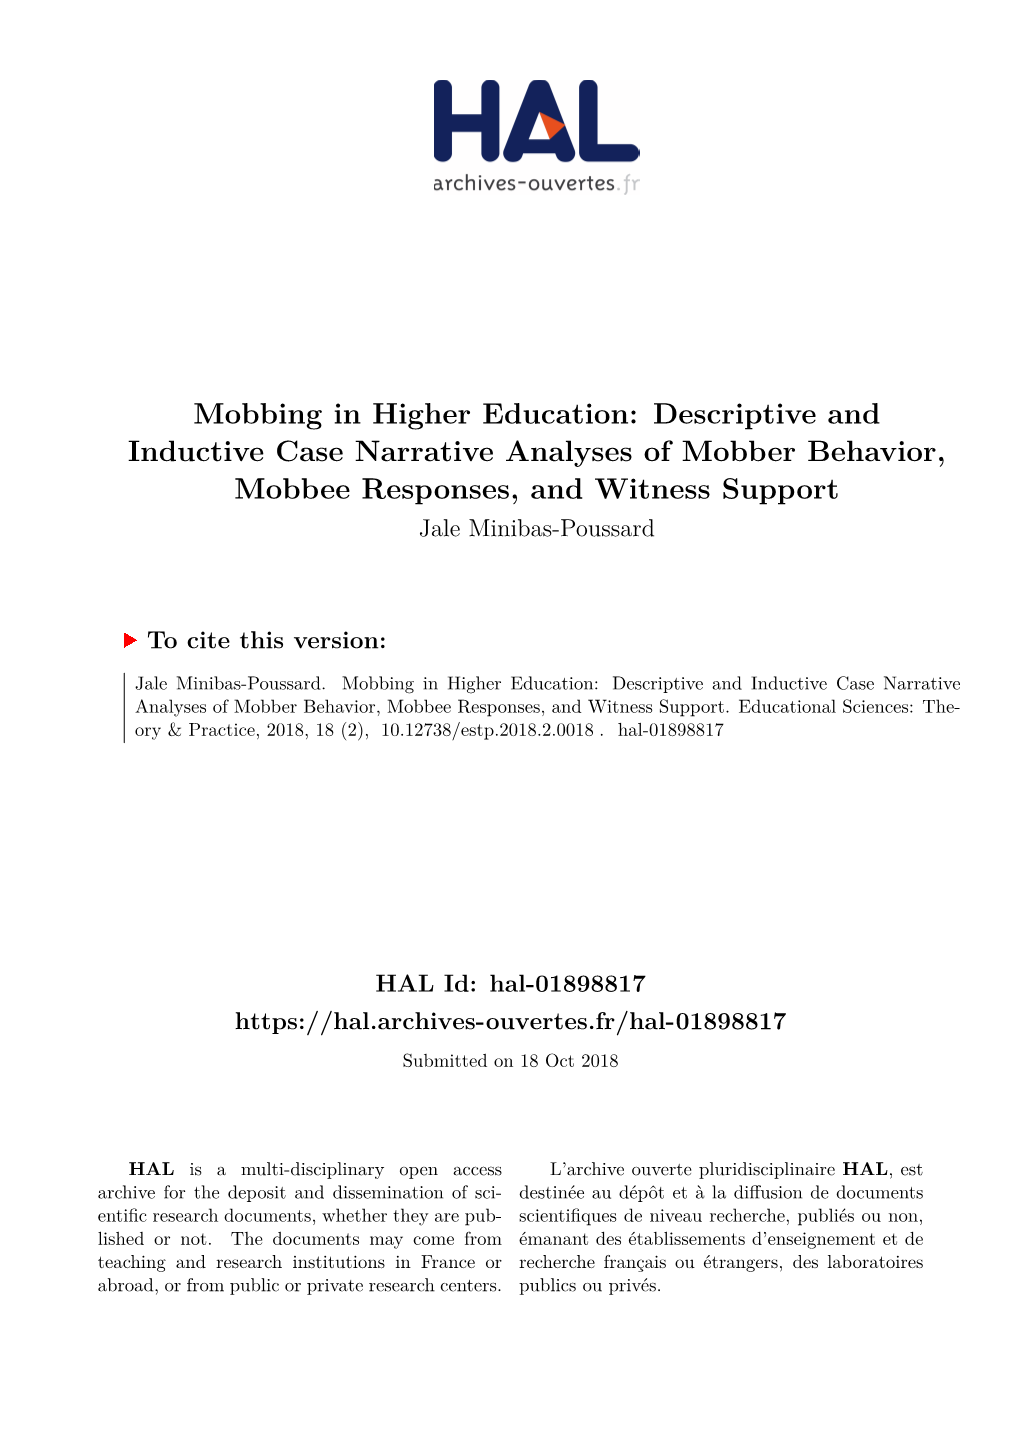 Mobbing in Higher Education: Descriptive and Inductive Case Narrative Analyses of Mobber Behavior, Mobbee Responses, and Witness Support Jale Minibas-Poussard